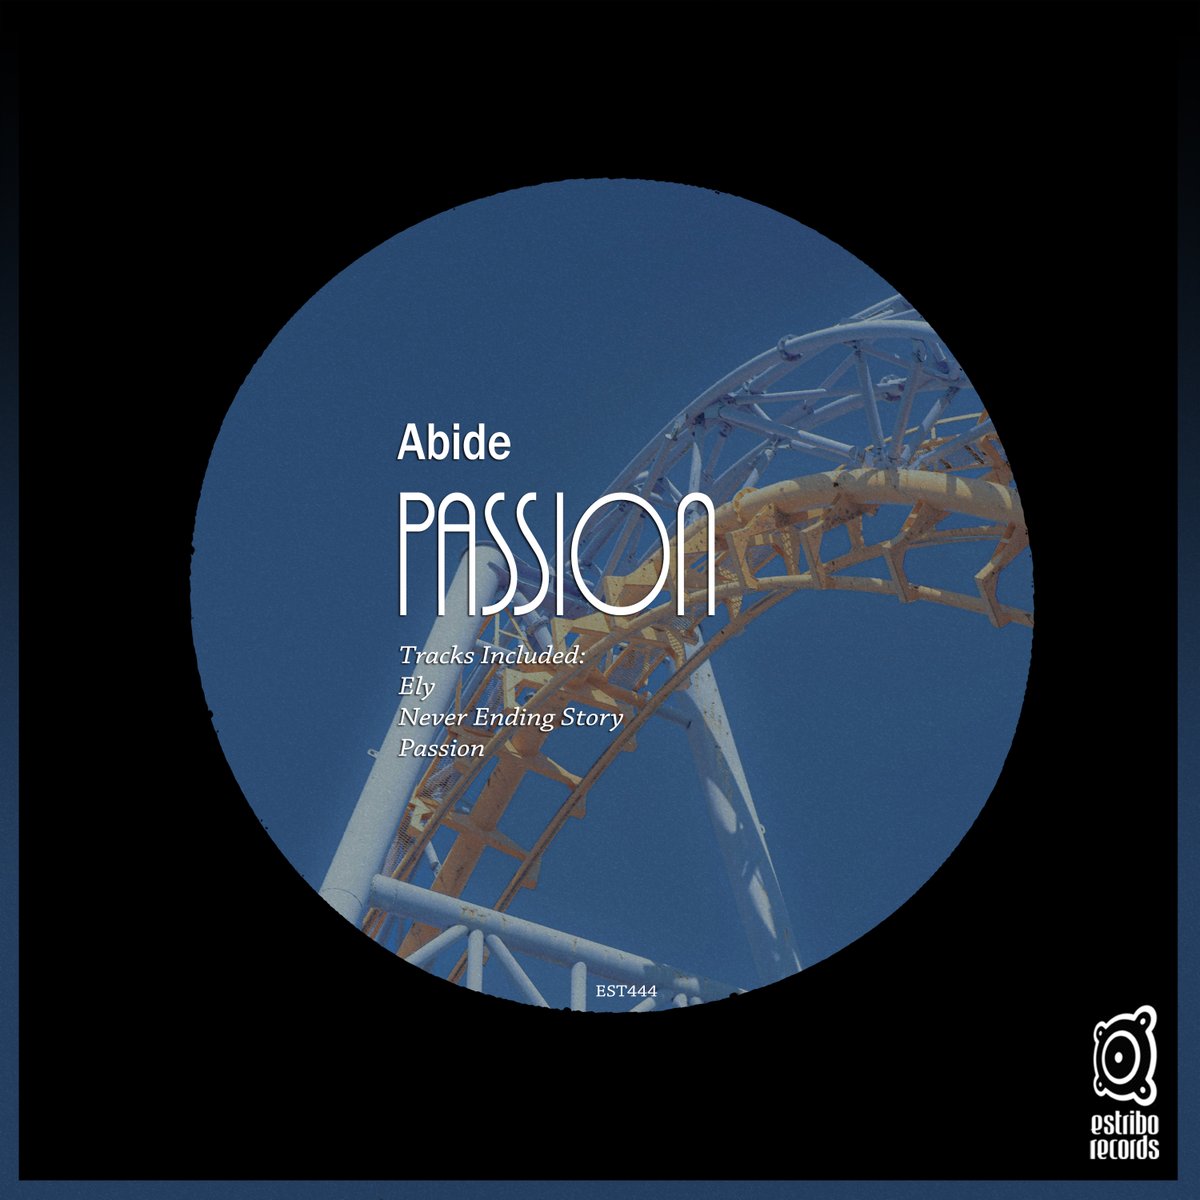 OUT NOW ON BEATPORT! Abide - Passion EP (Estribo Records) Aug 11, 2022 beatport.com/release/passio…